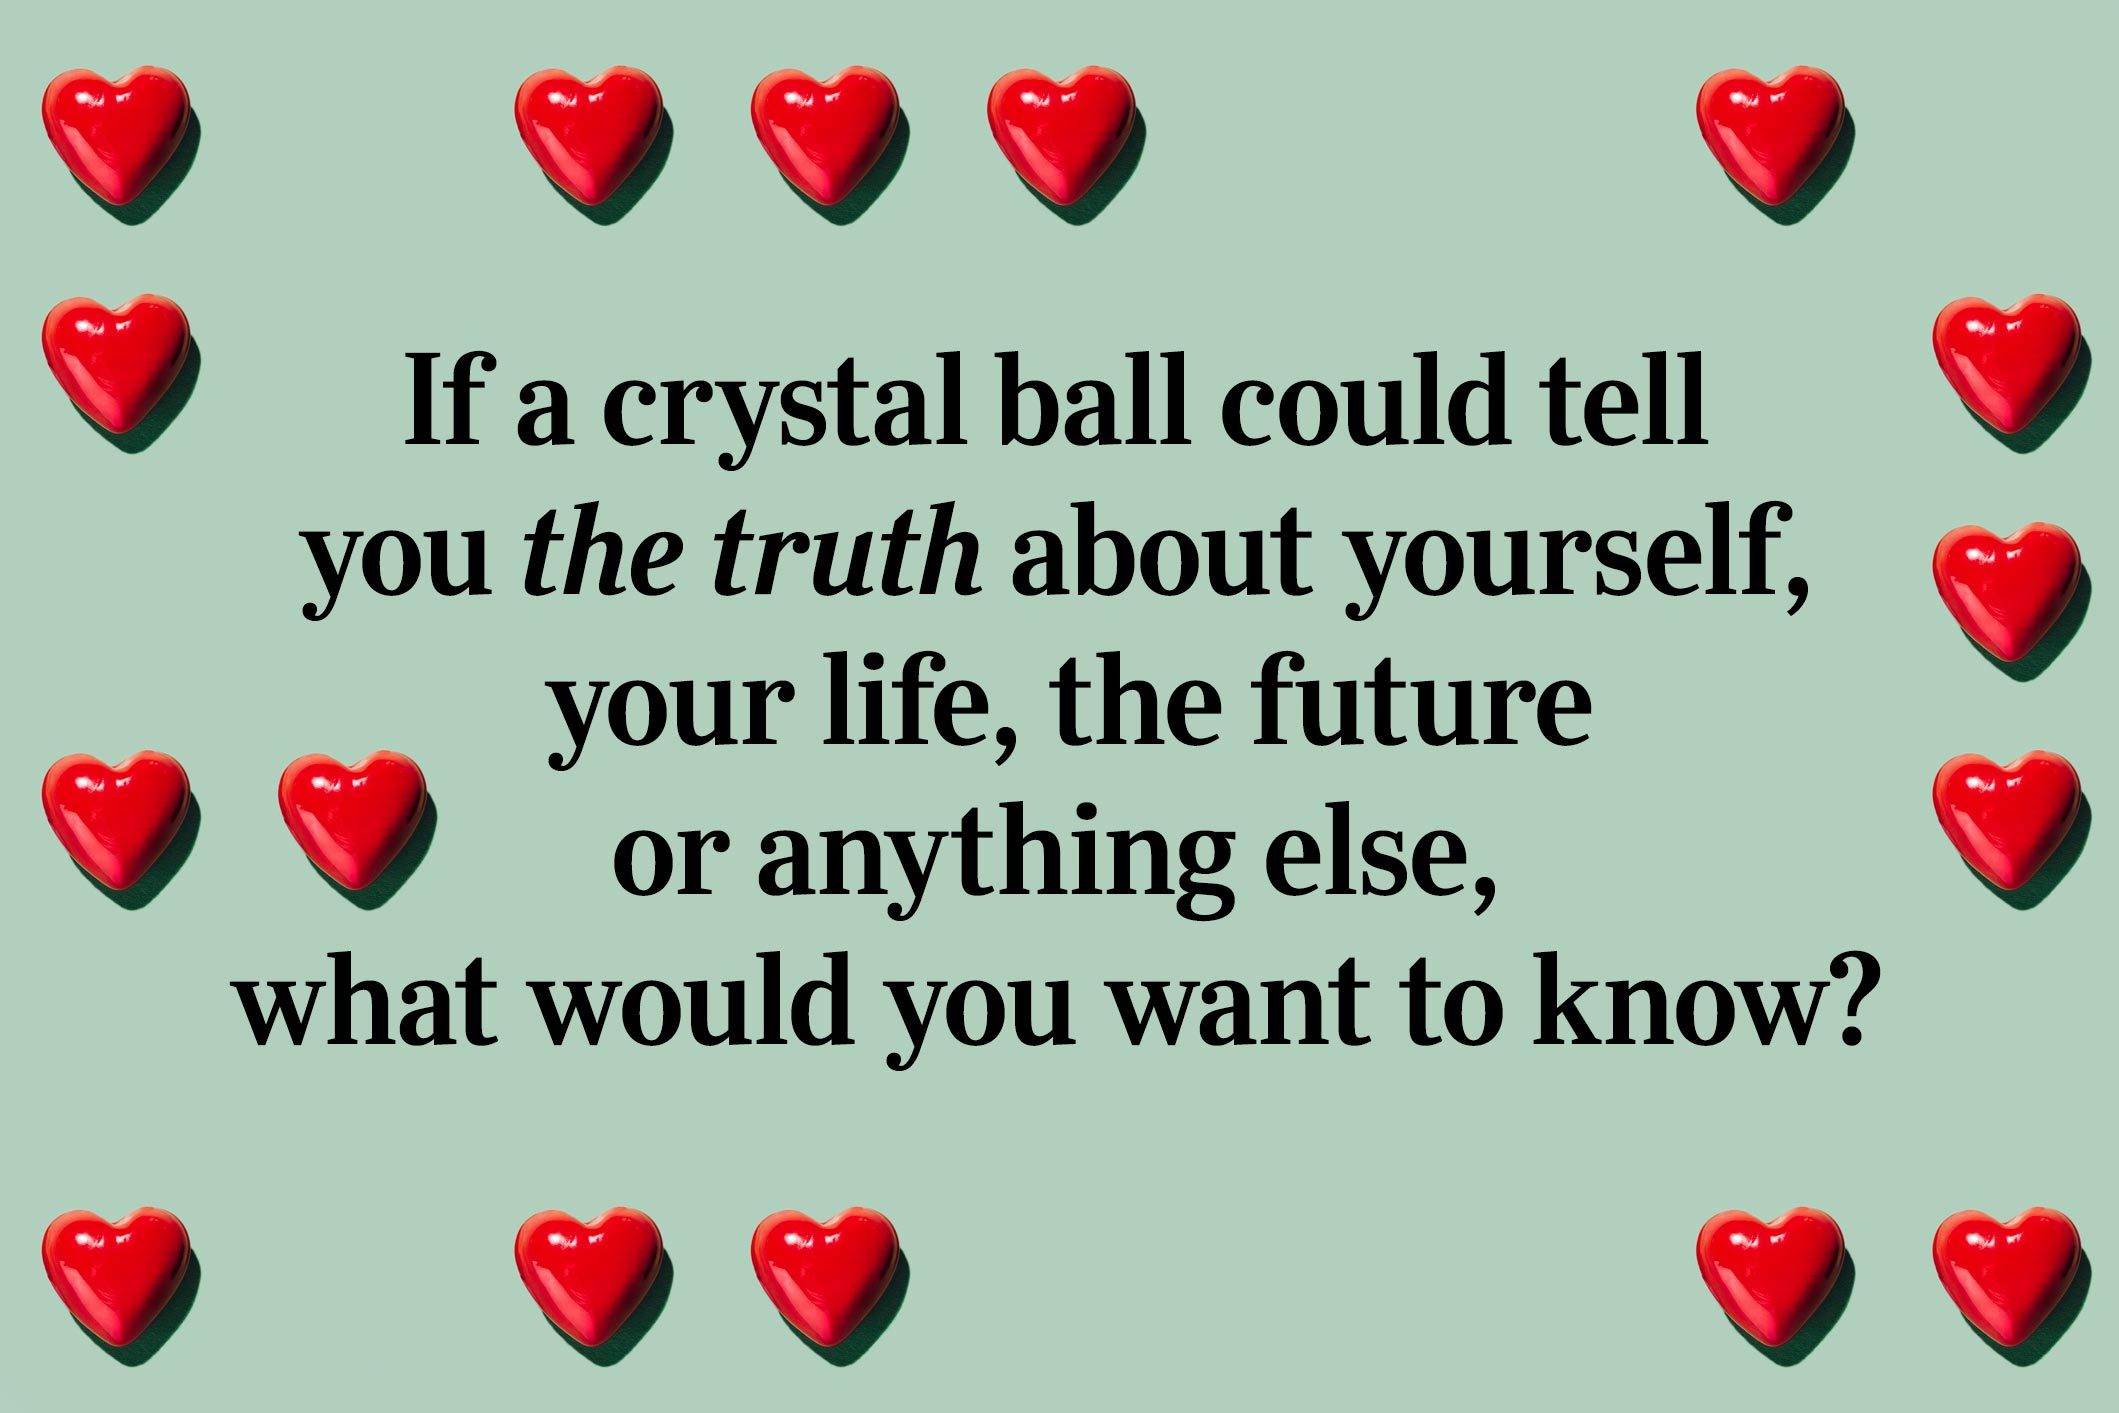 <p>If a crystal ball could tell you the truth about yourself, your life, the future or anything else, what would you want to know?</p>